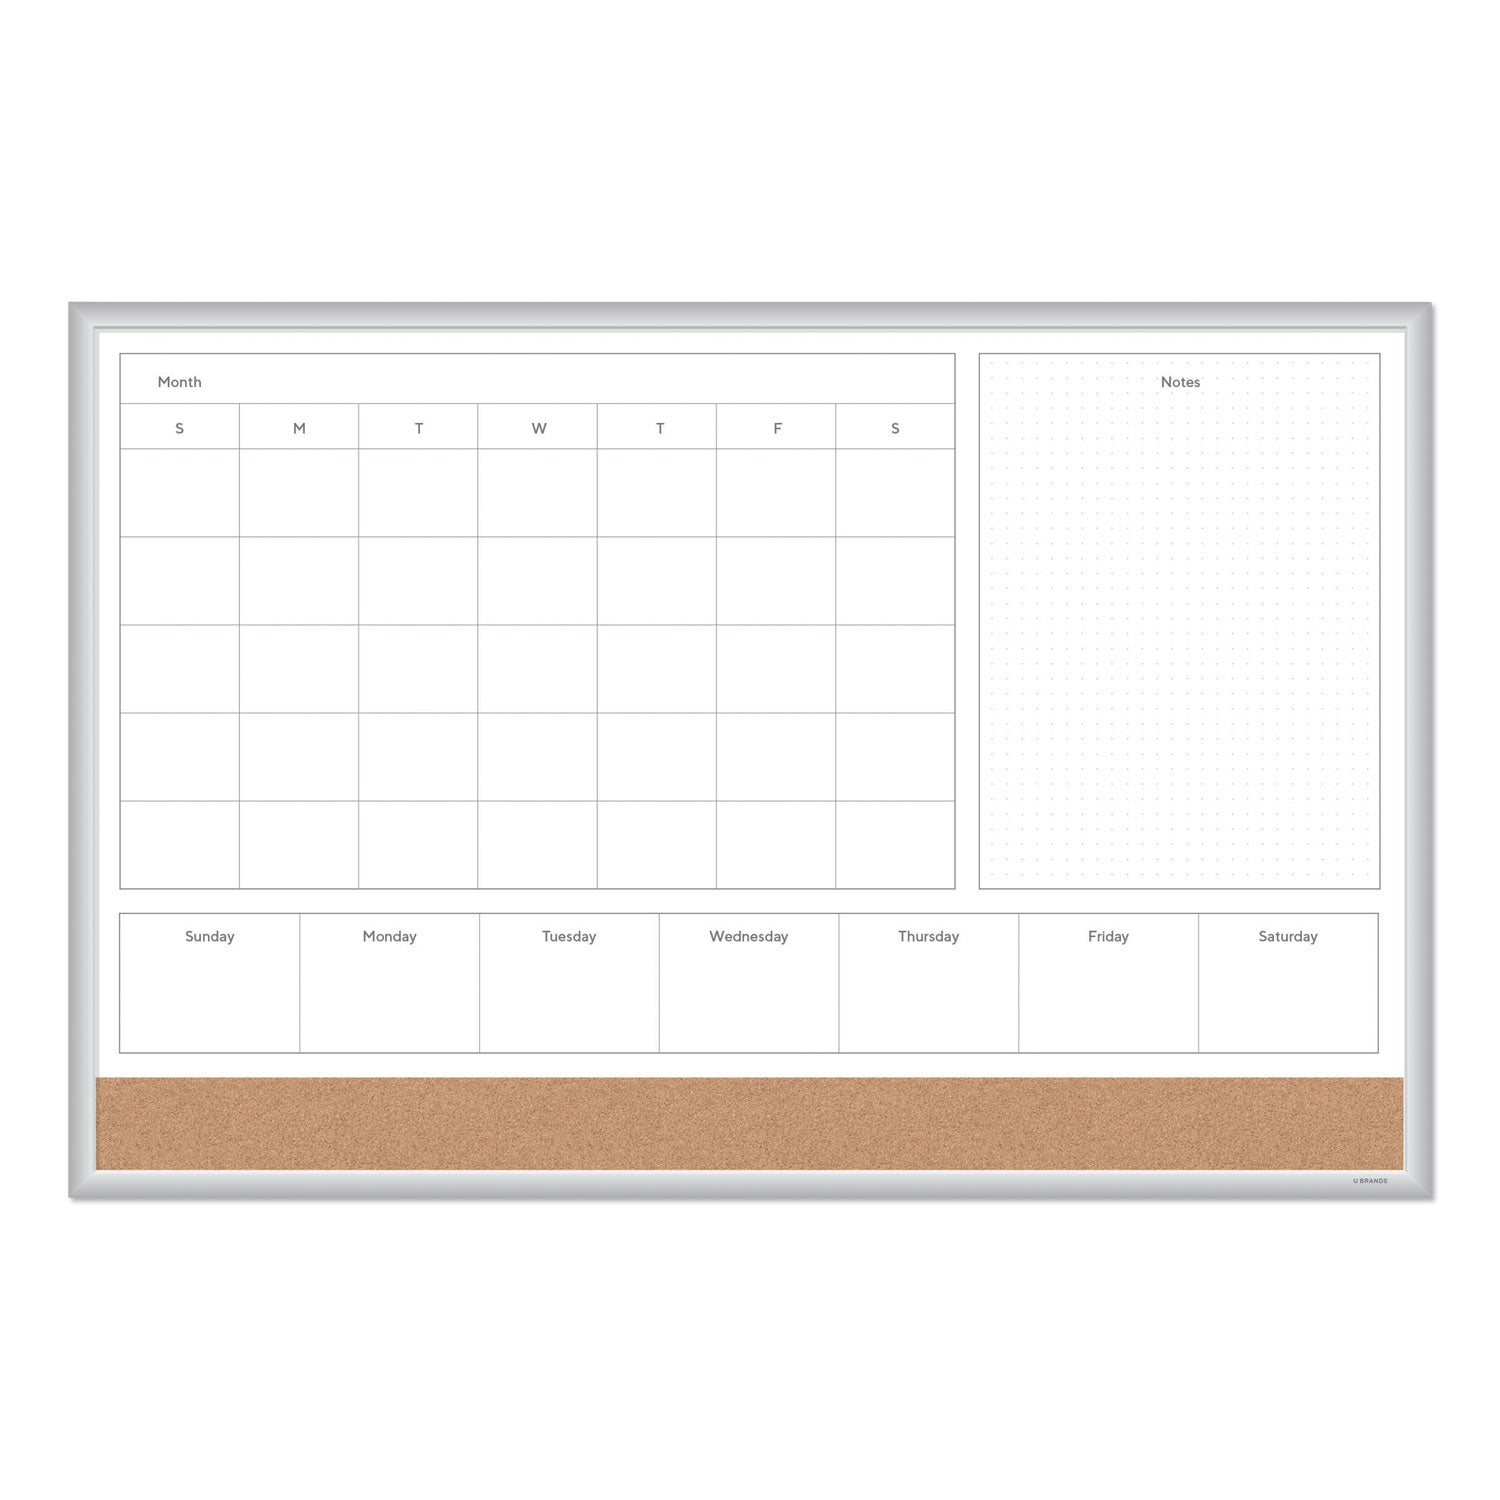 4n1-magnetic-dry-erase-combo-board-35-x-23-tan-white-surface-silver-aluminum-frame_ubr3891u0001 - 2